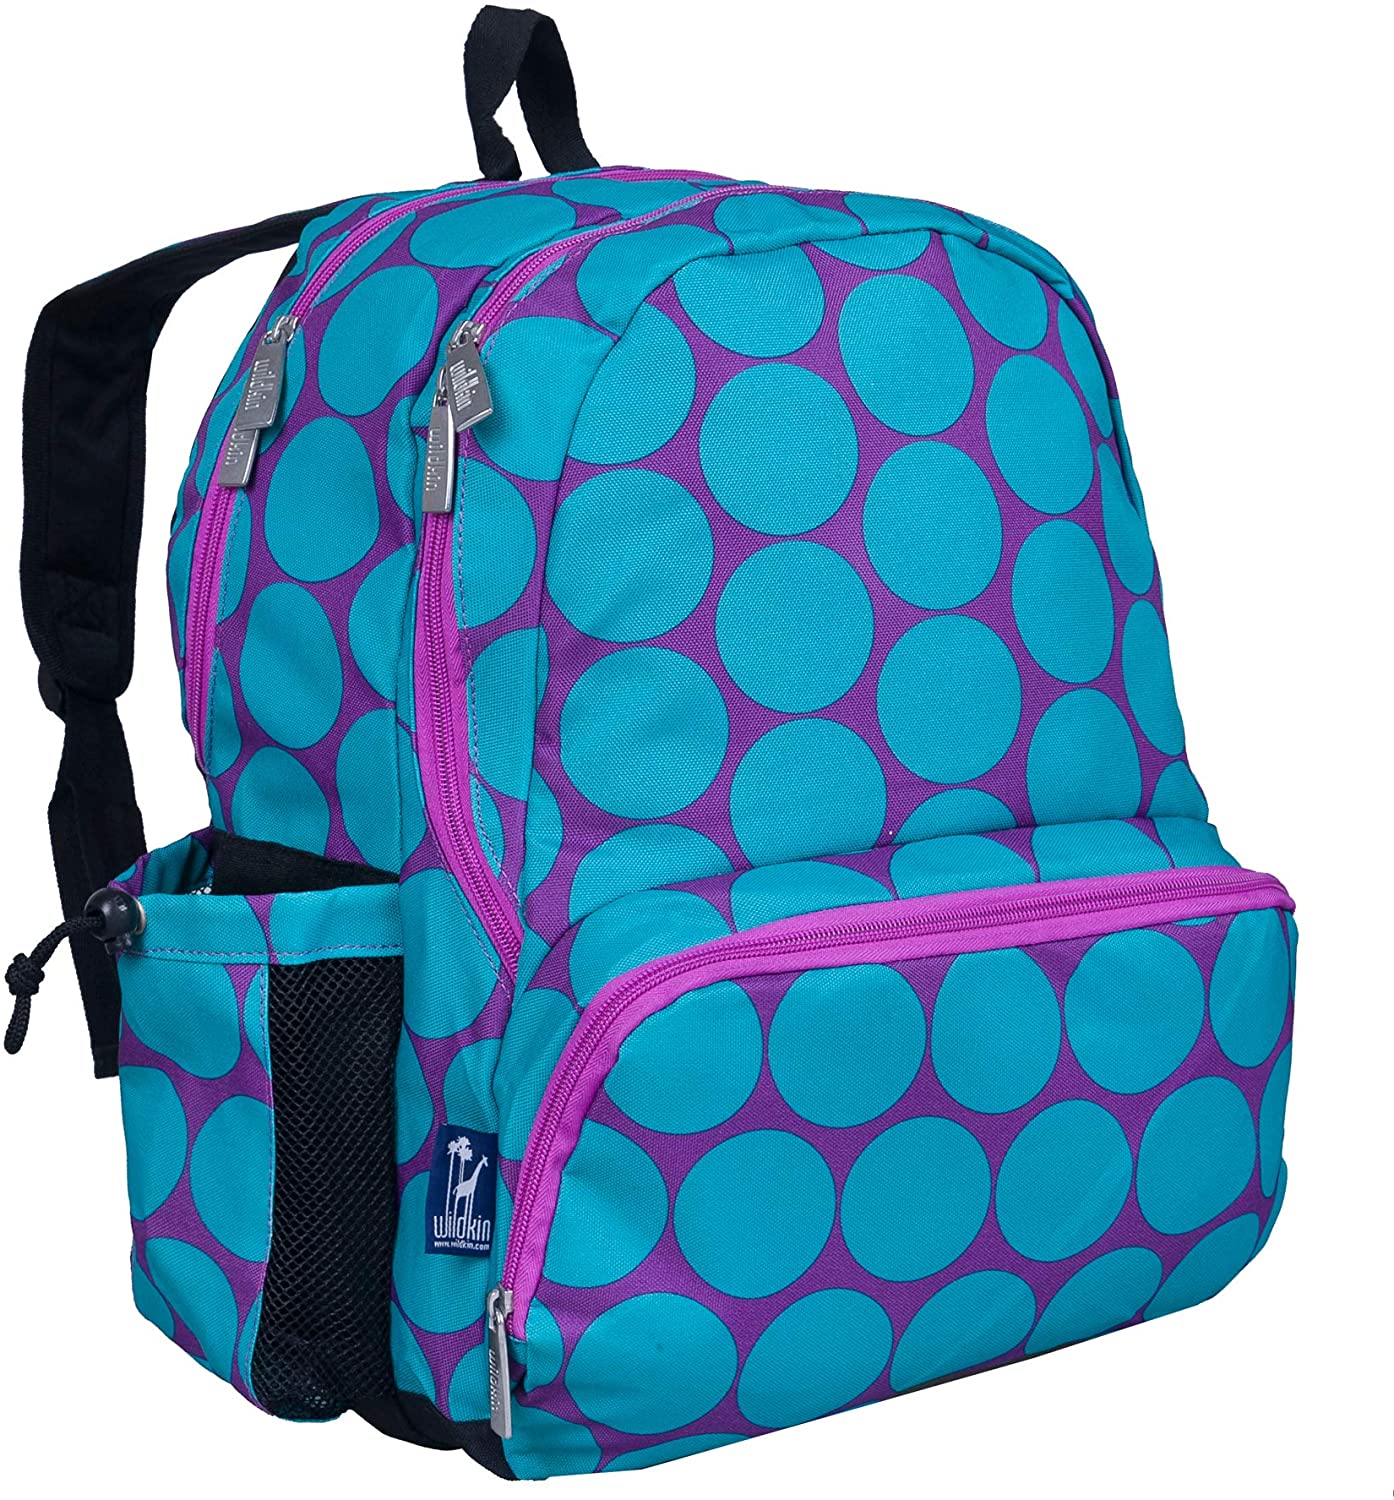 Wildkin Kids 17 Inch Backpack for Boys and Girls, Perfect for School and Travel (Big Dot Aqua) - image 1 of 7